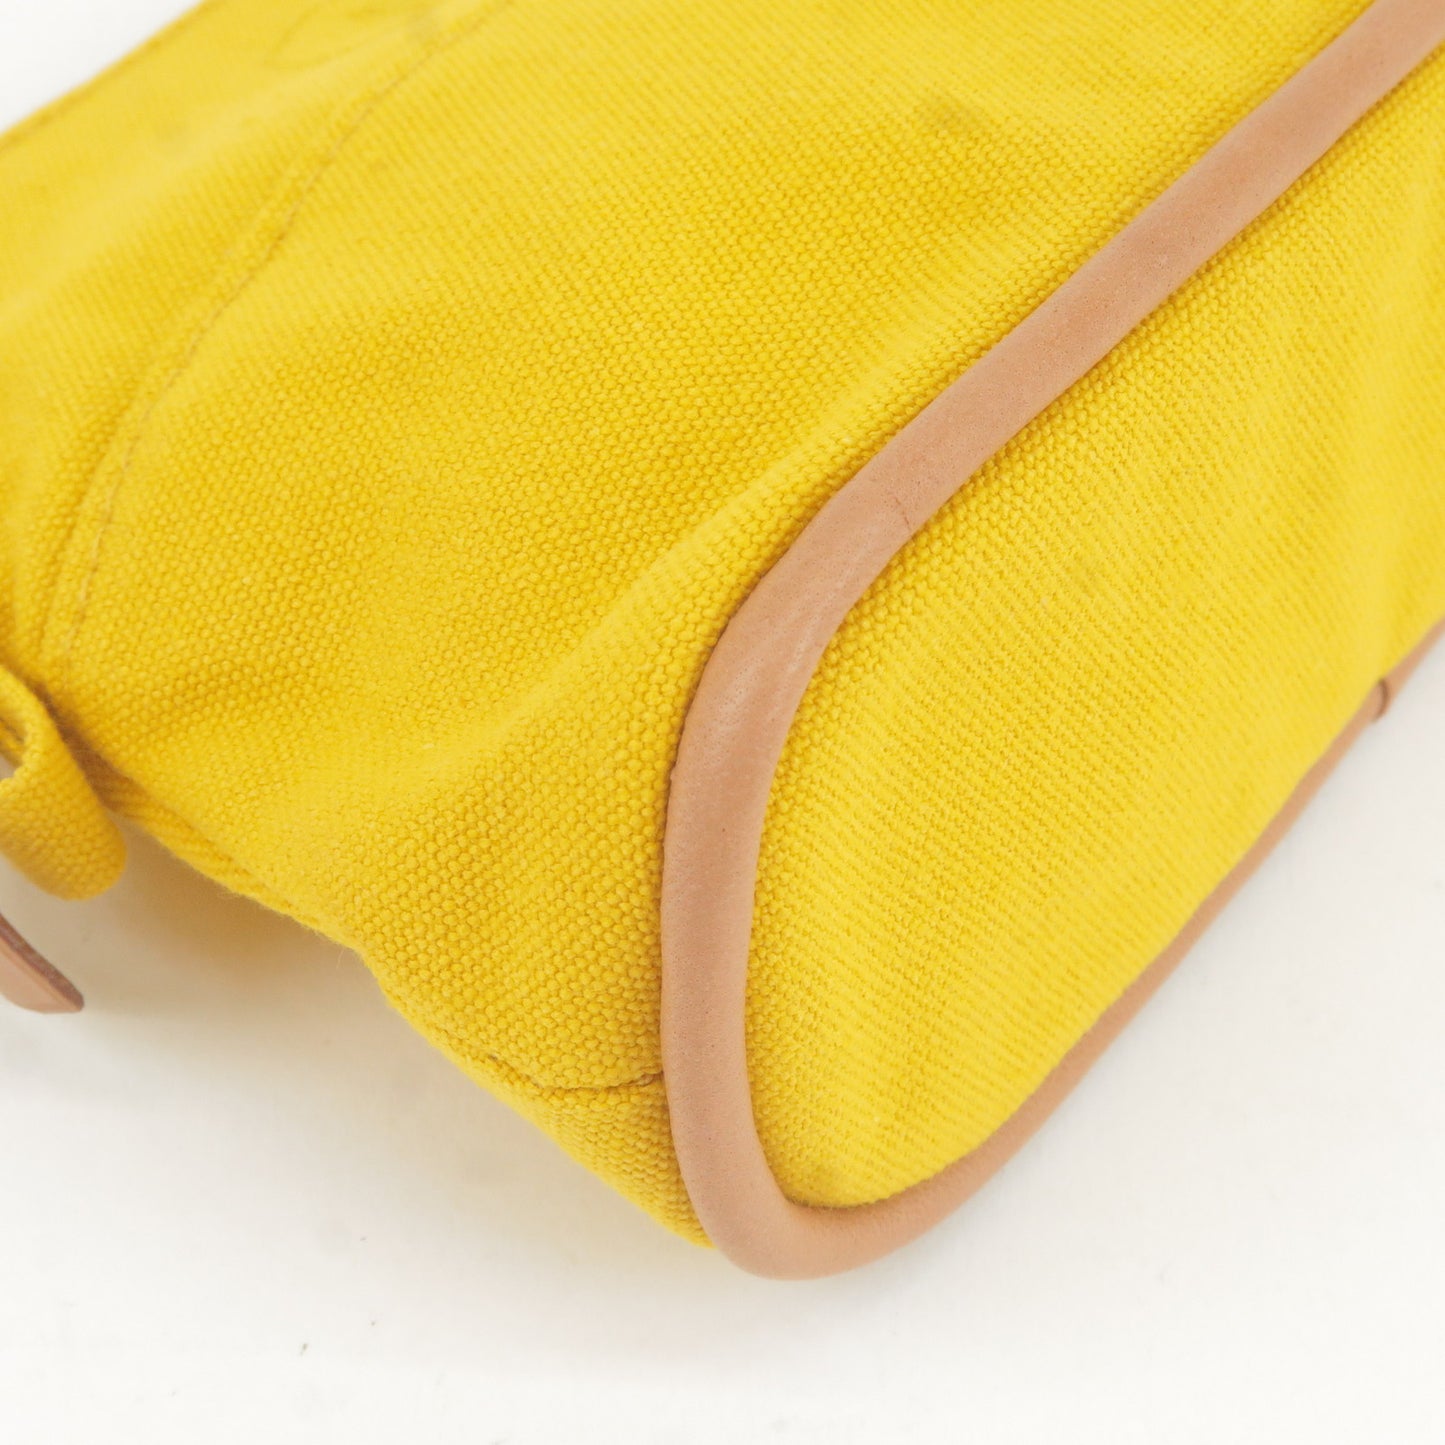 HERMES Canvas Leather Bolide Mini Pouch Cosmetics Bag Yellow